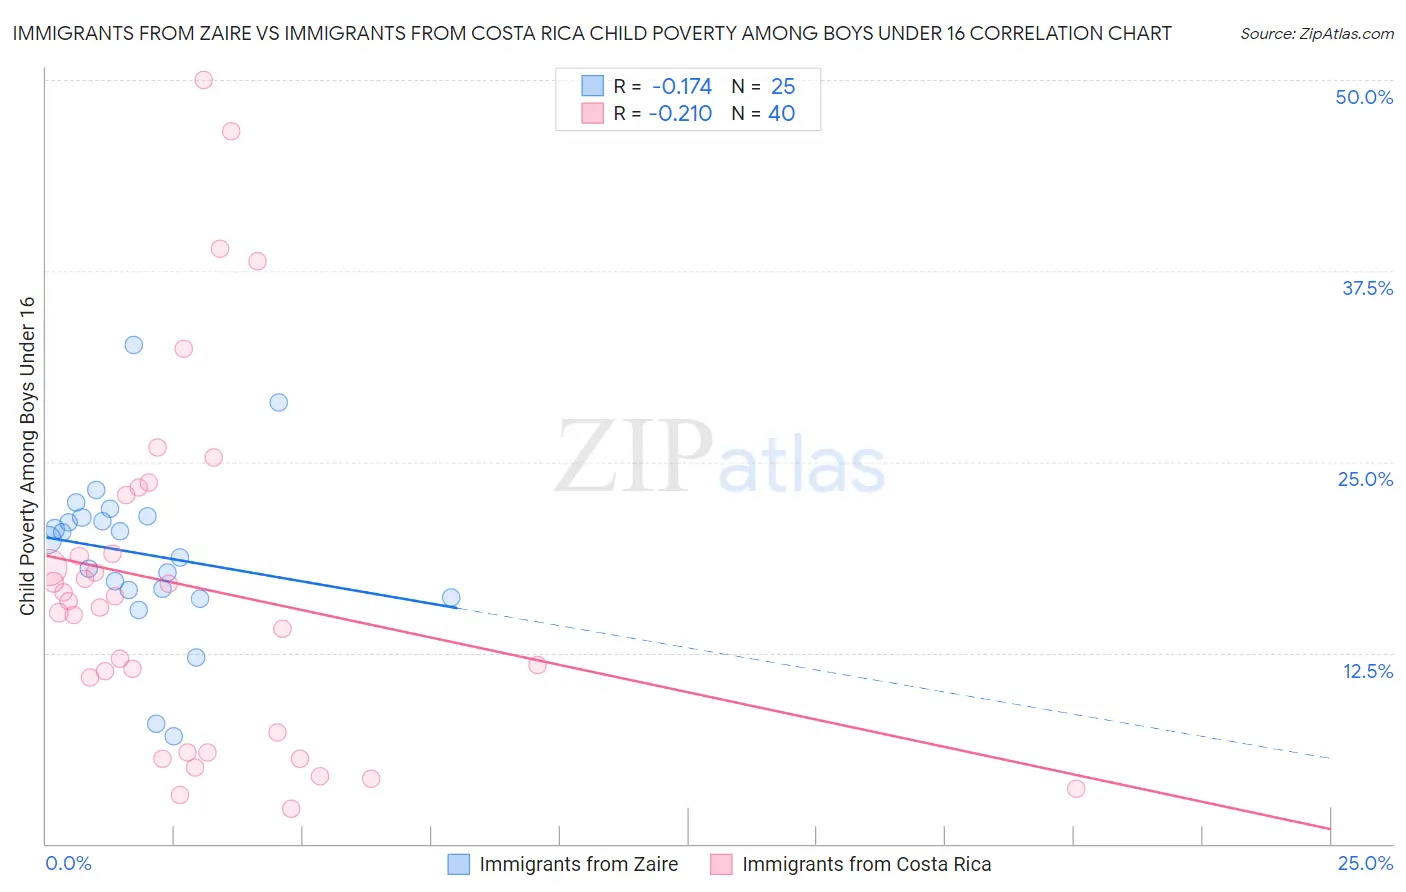 Immigrants from Zaire vs Immigrants from Costa Rica Child Poverty Among Boys Under 16